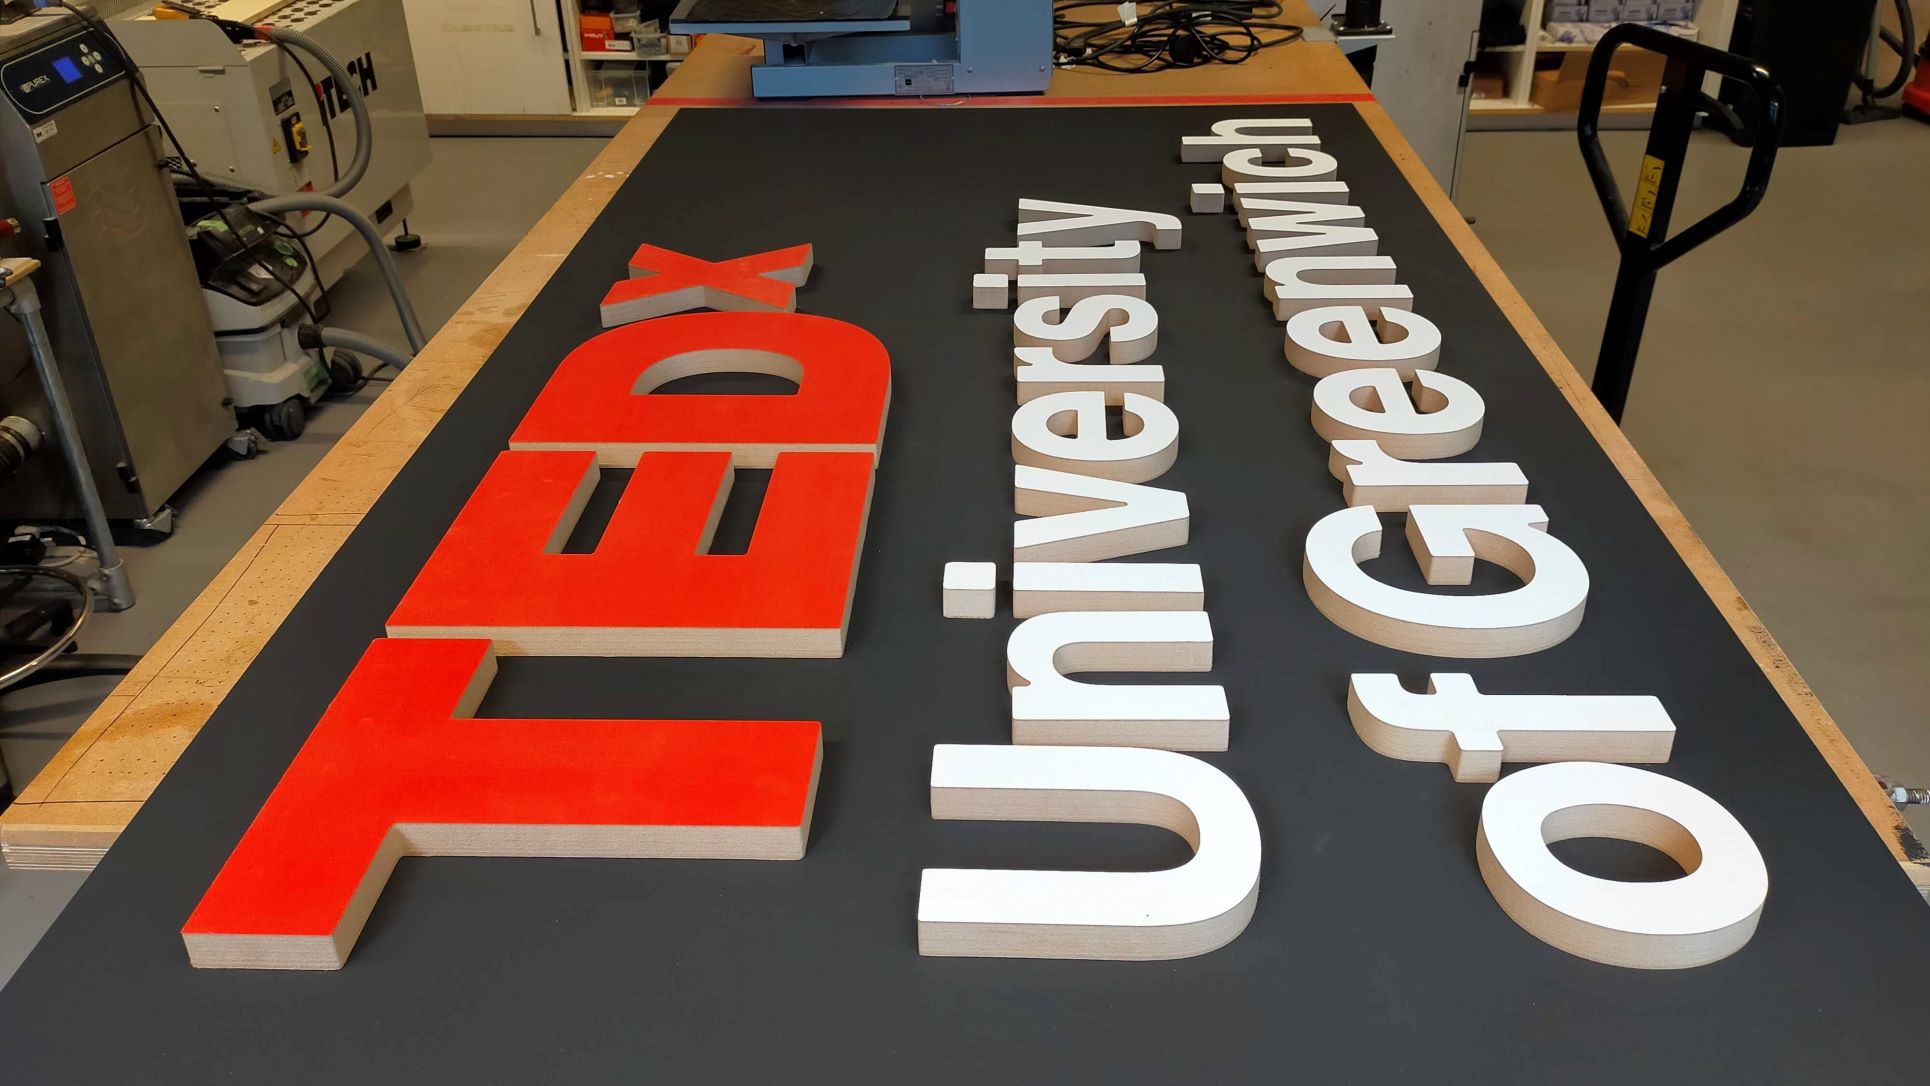 View of the sign from the side, pictured in a workshop